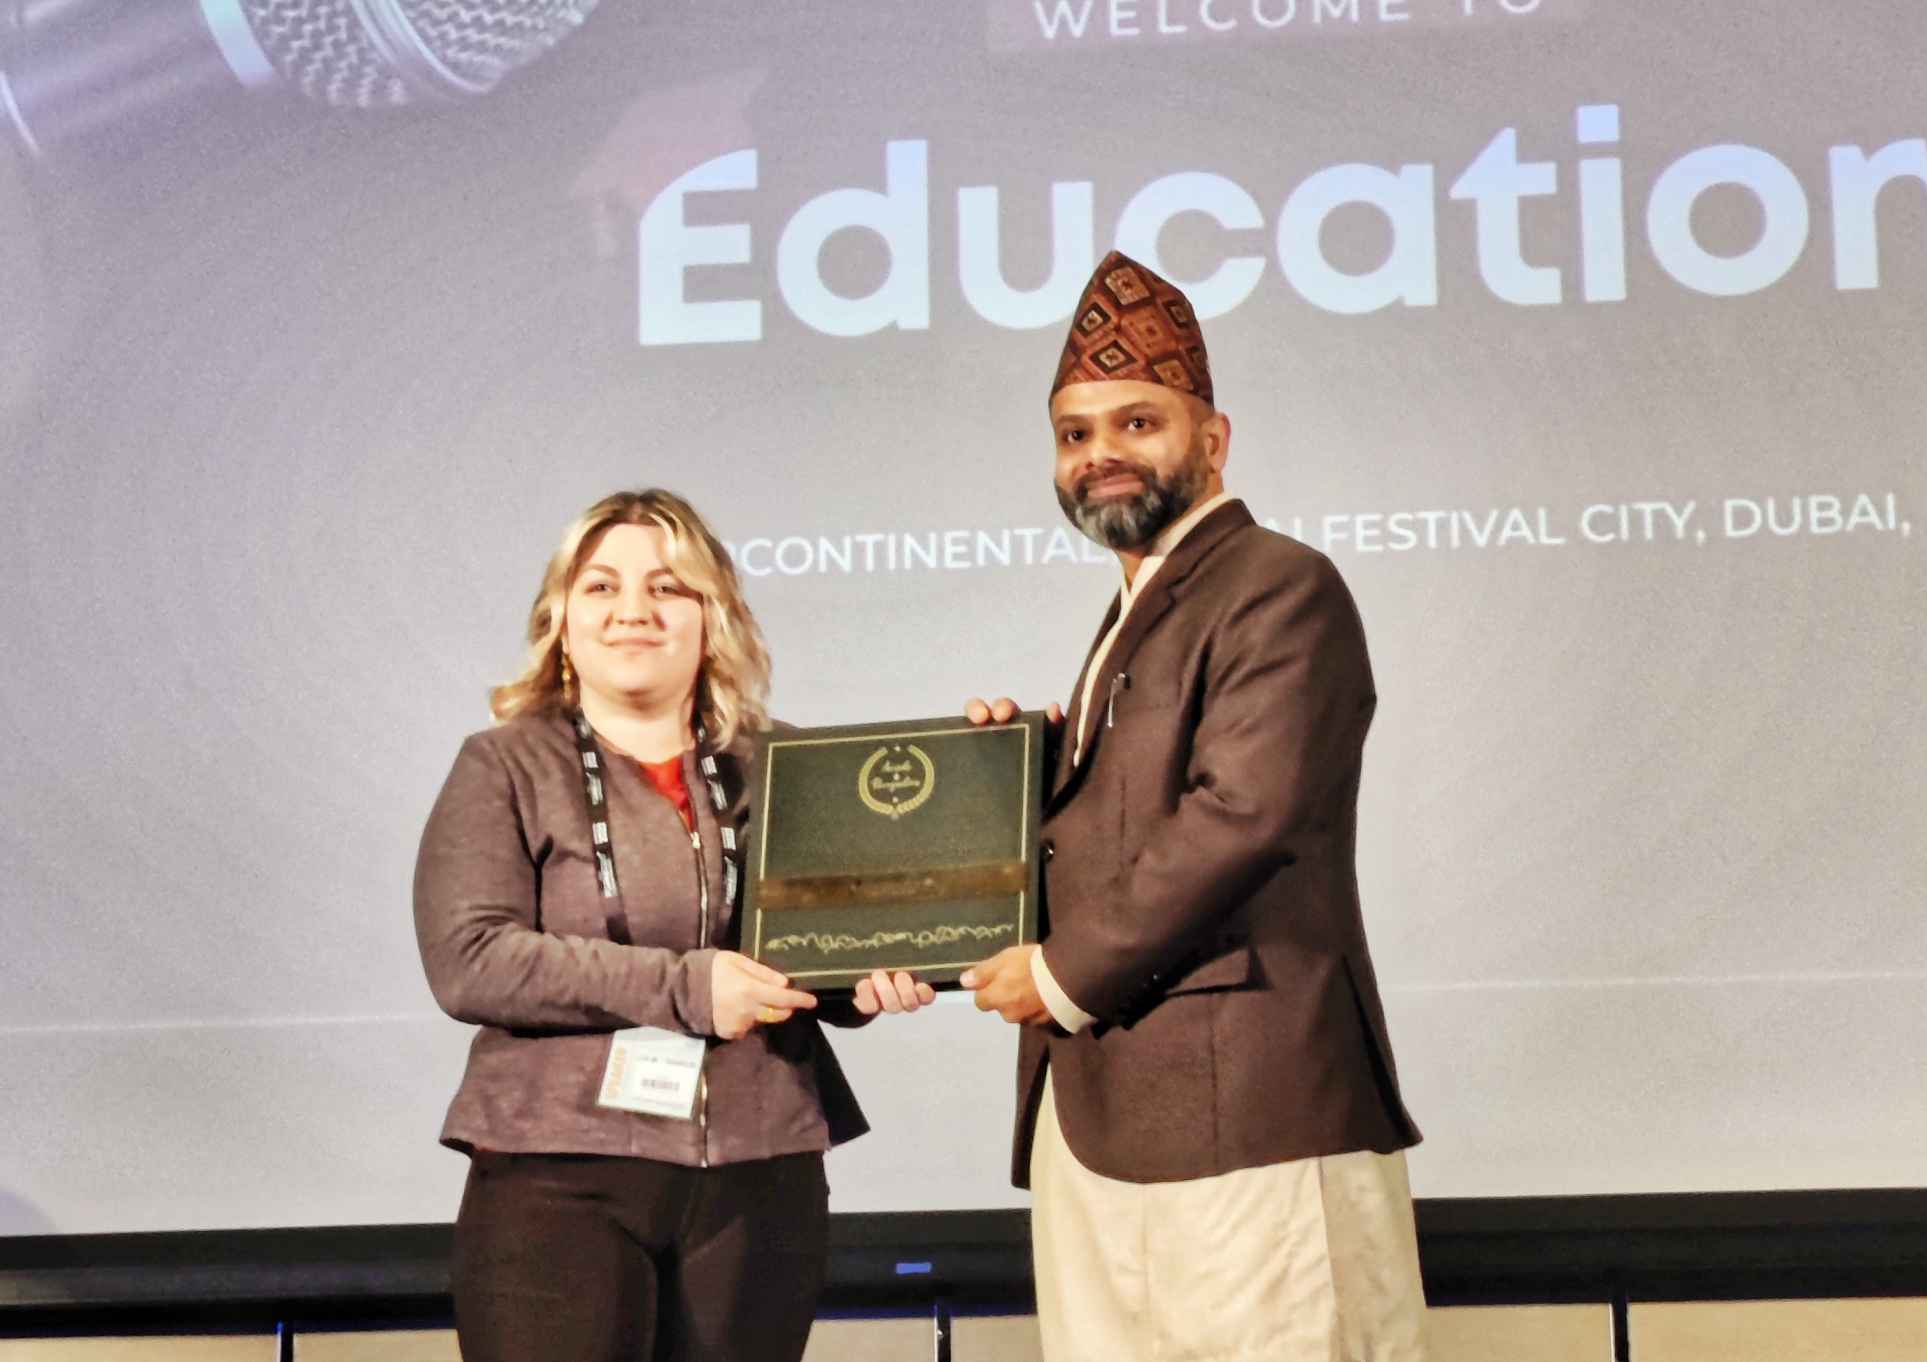 Mr. Laxman Pokhrel awarded with Outstanding Leadership Award at Education 2.0 Conference held in Dubai